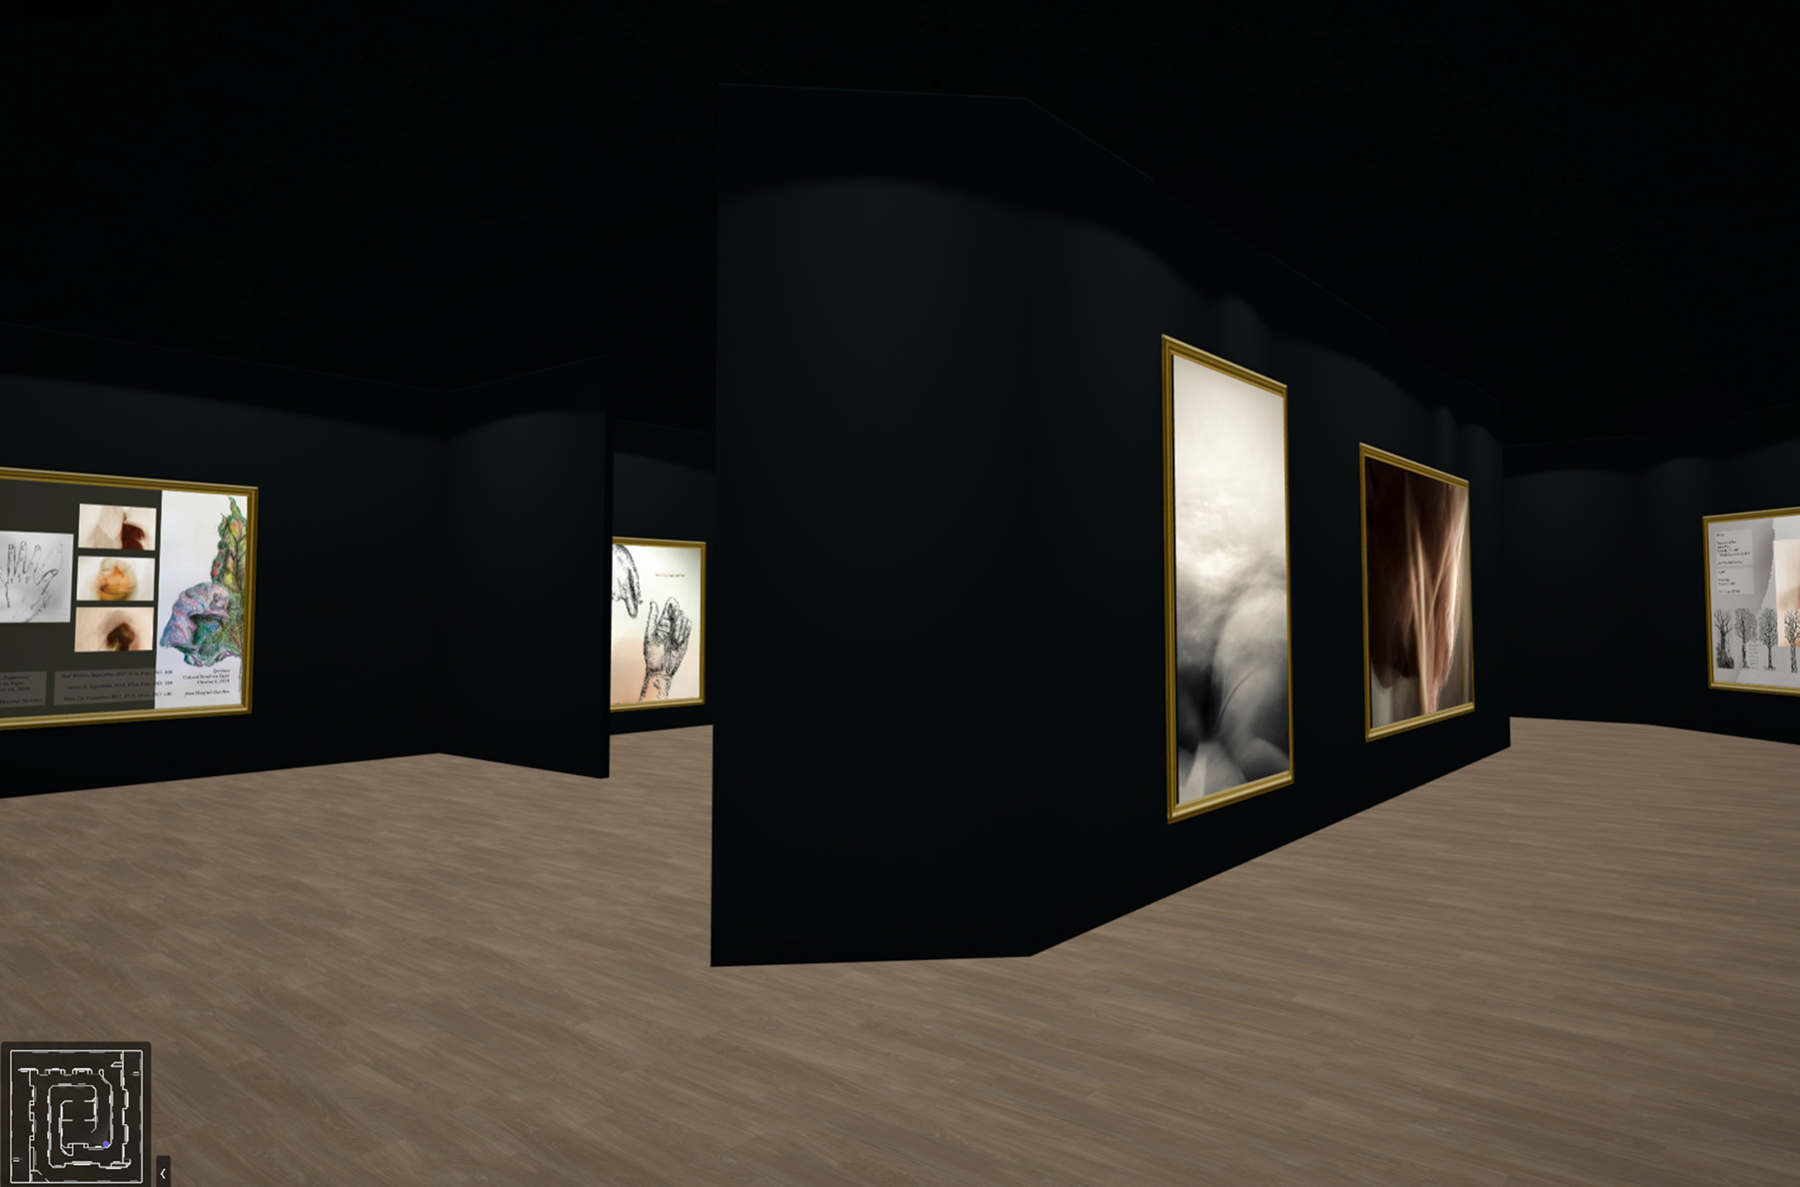 Gallery view of Hypnagogia, courtesy of the artist